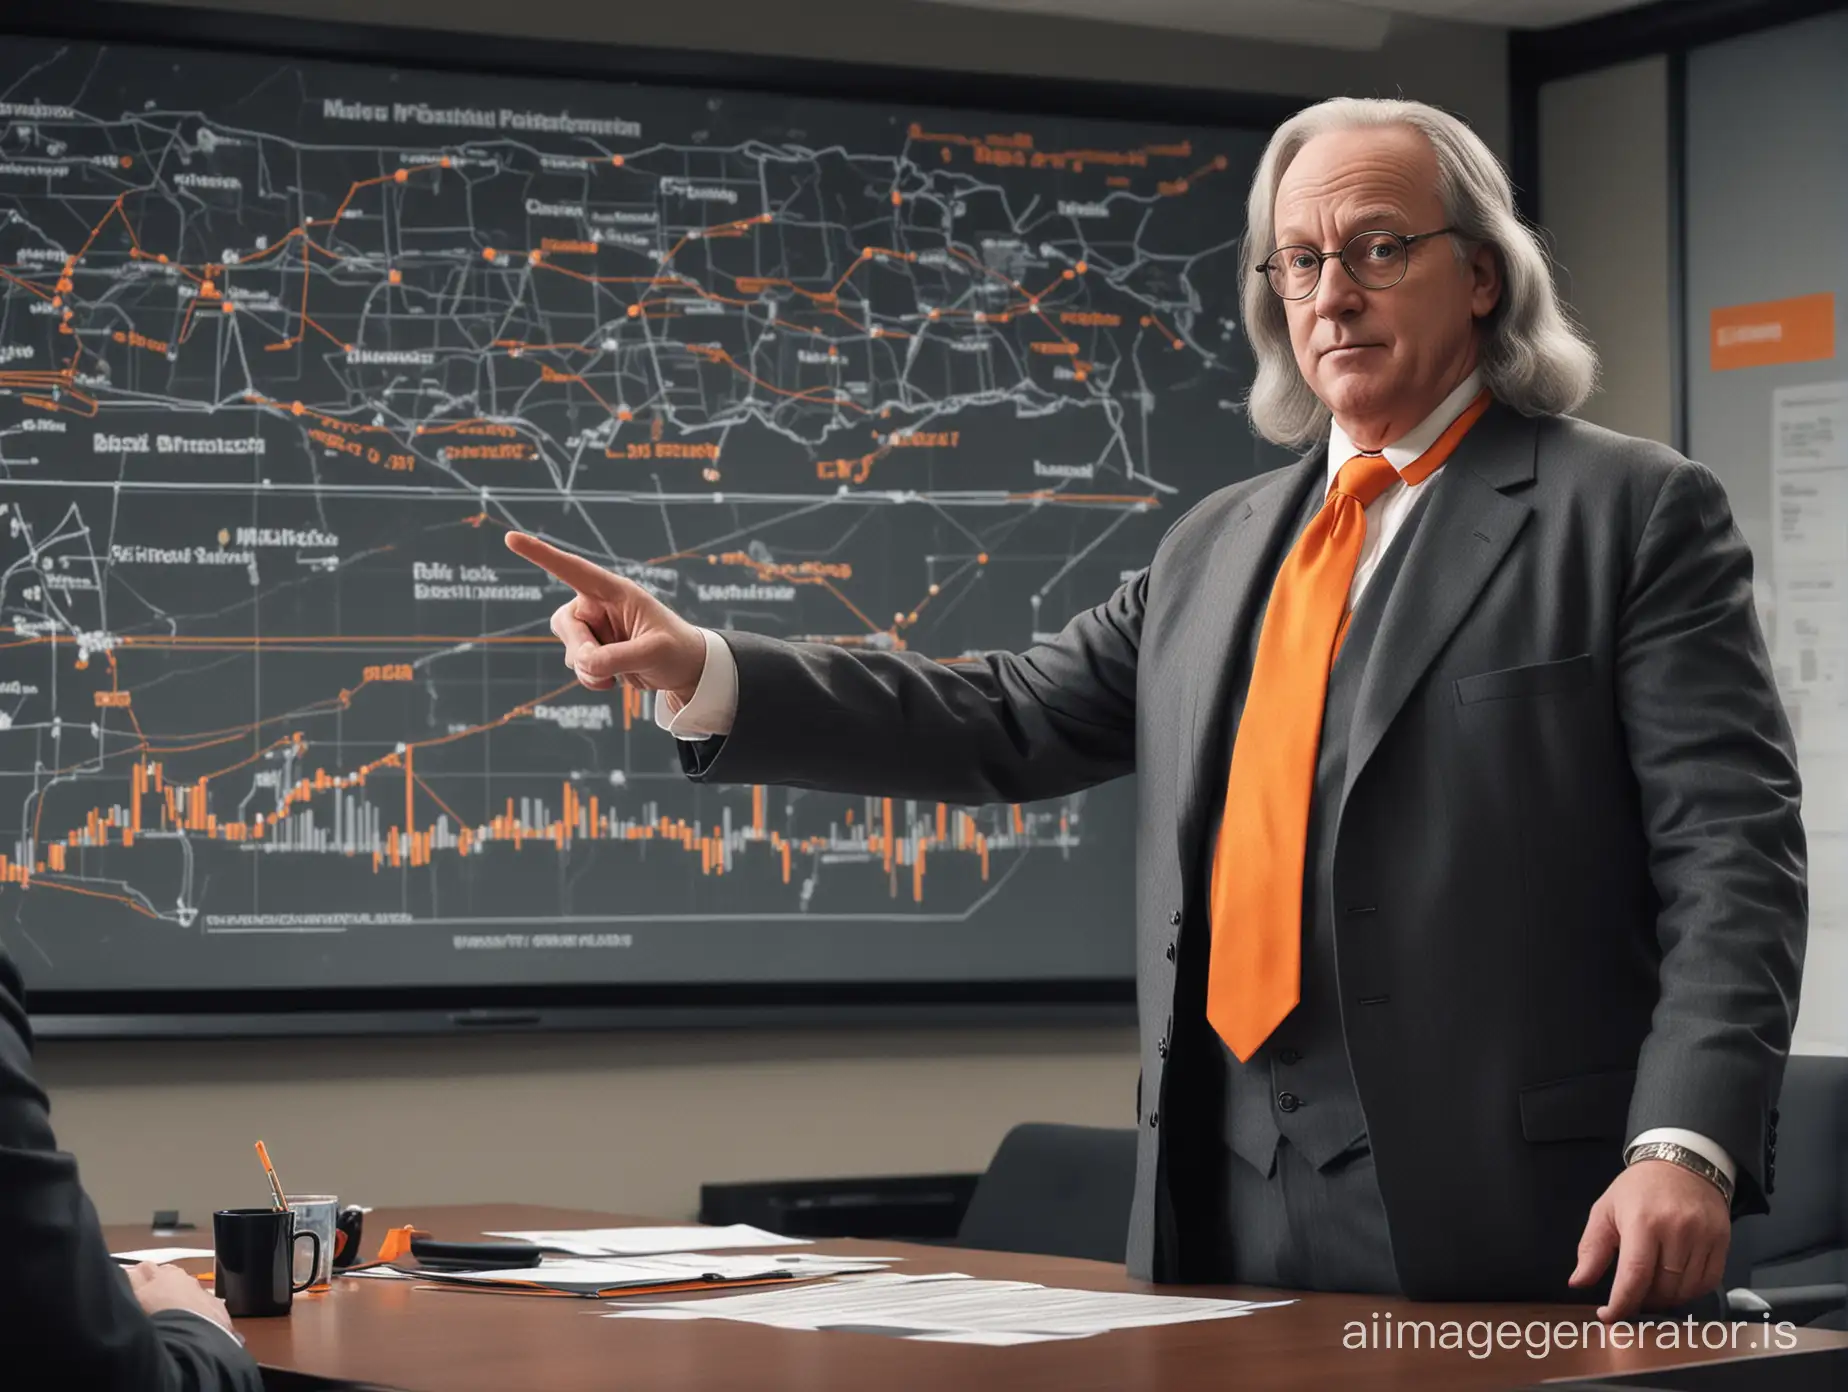 Ben-Franklin-in-Modern-Conference-Room-Presenting-Analytics-with-Gray-and-Orange-Scheme